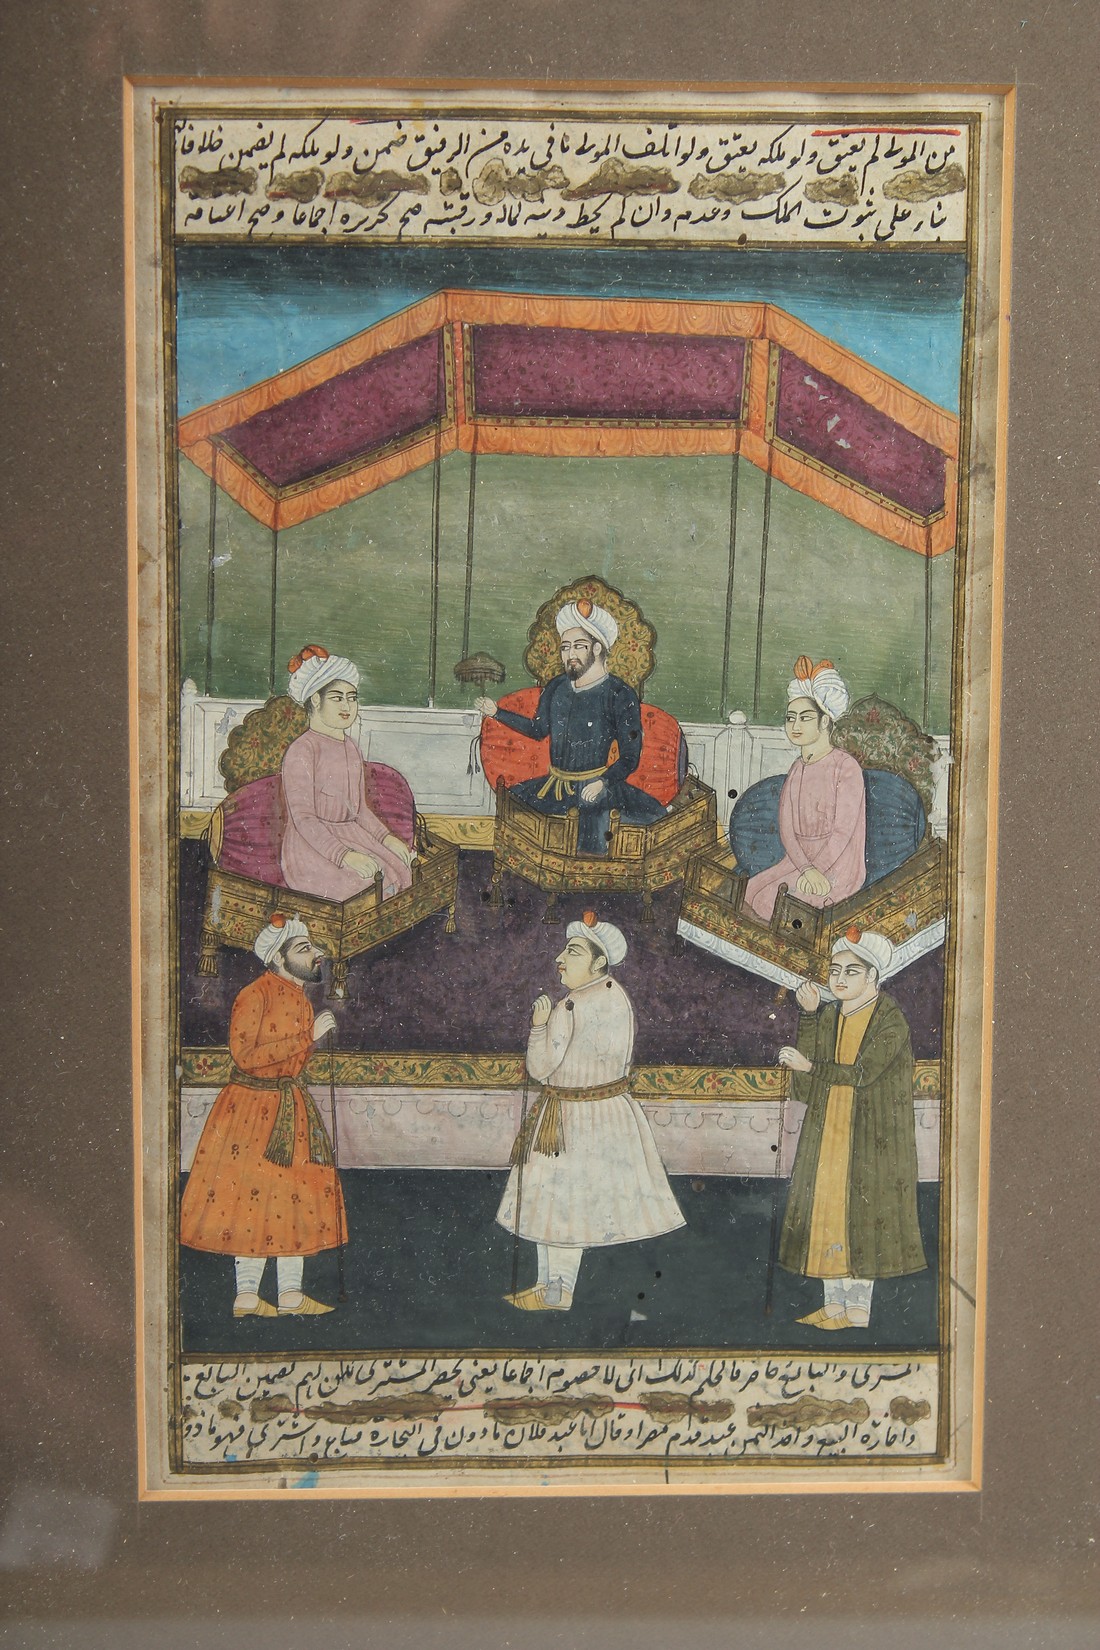 TWO ISLAMIC ILLUMINATED MANUSCRIPT PAGES, each finely painted with scenes of figures and panels of - Image 3 of 3